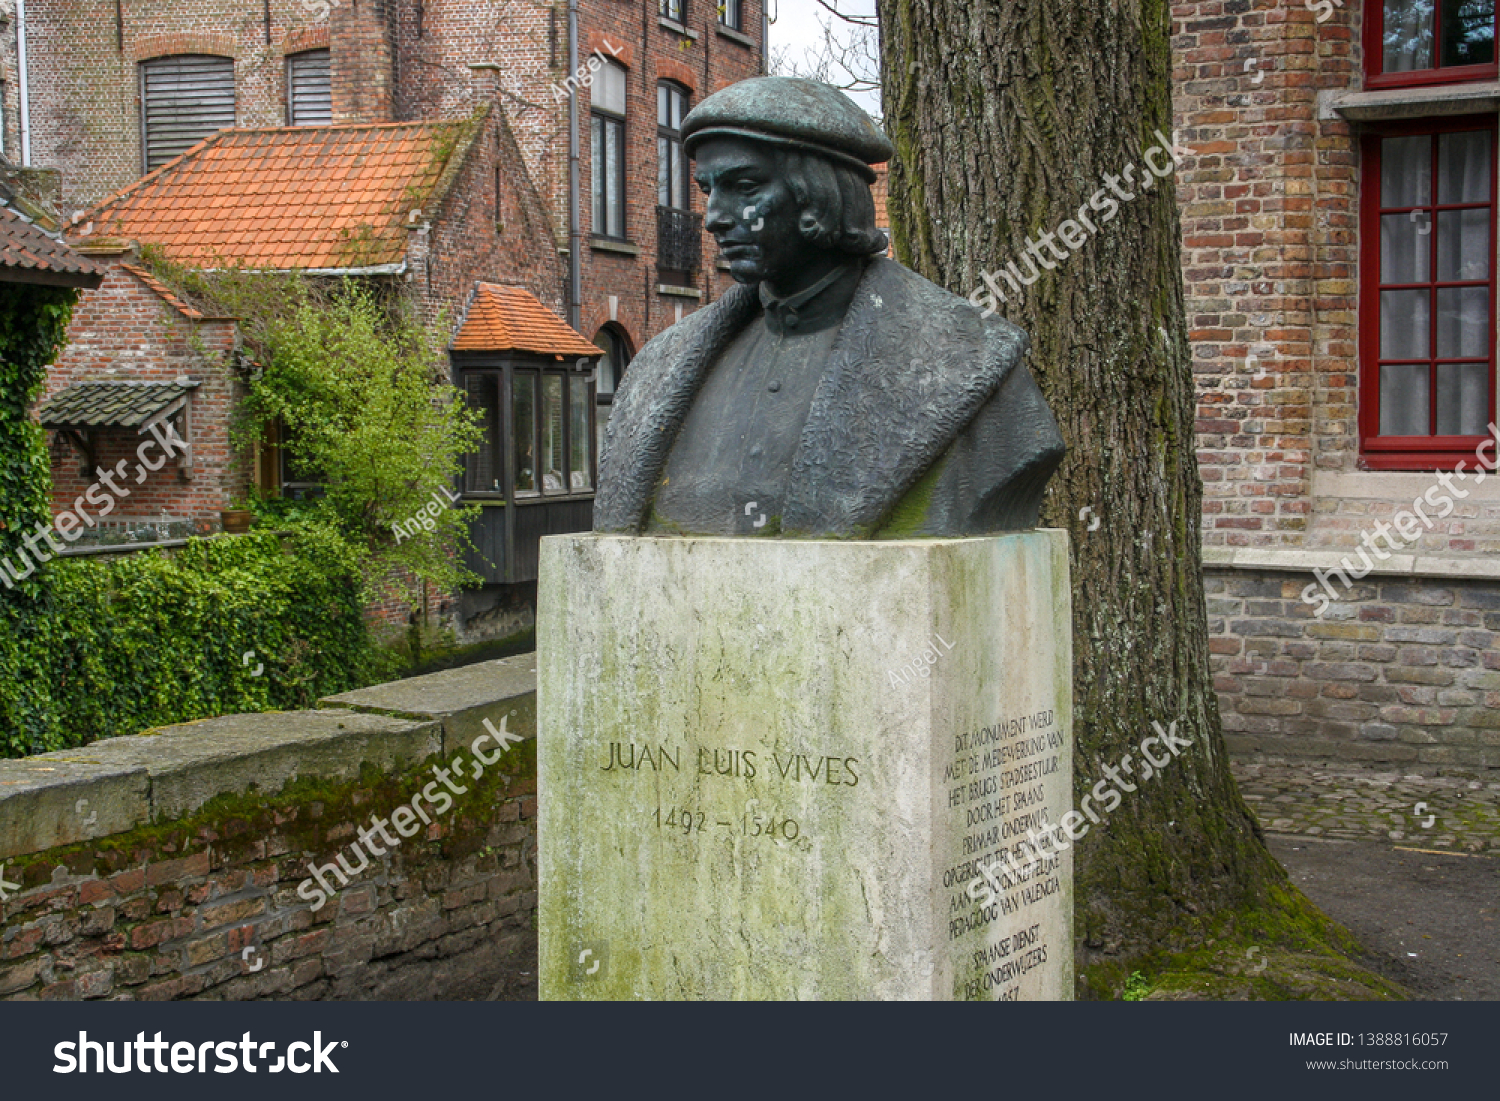 Bruges, Belgium; 04 28 2016. Bust of Juan Luis Vives in Bruges. Located behind the Church of Our Lady, next to a small canal and surrounded by trees #1388816057